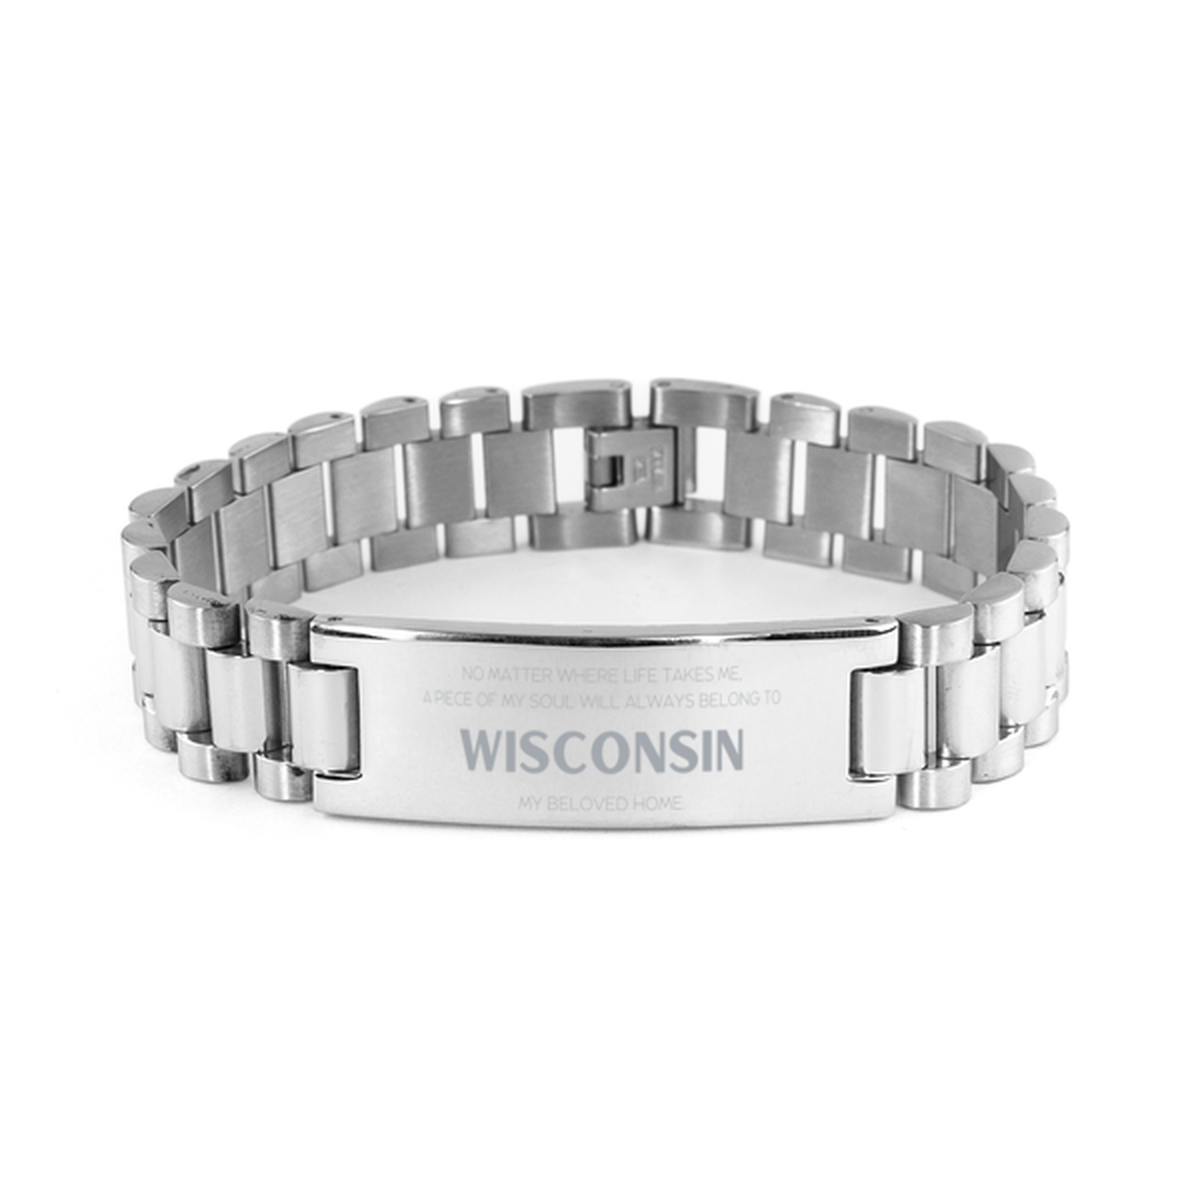 Love Wisconsin State Gifts, My soul will always belong to Wisconsin, Proud Ladder Stainless Steel Bracelet, Birthday Unique Gifts For Wisconsin Men, Women, Friends